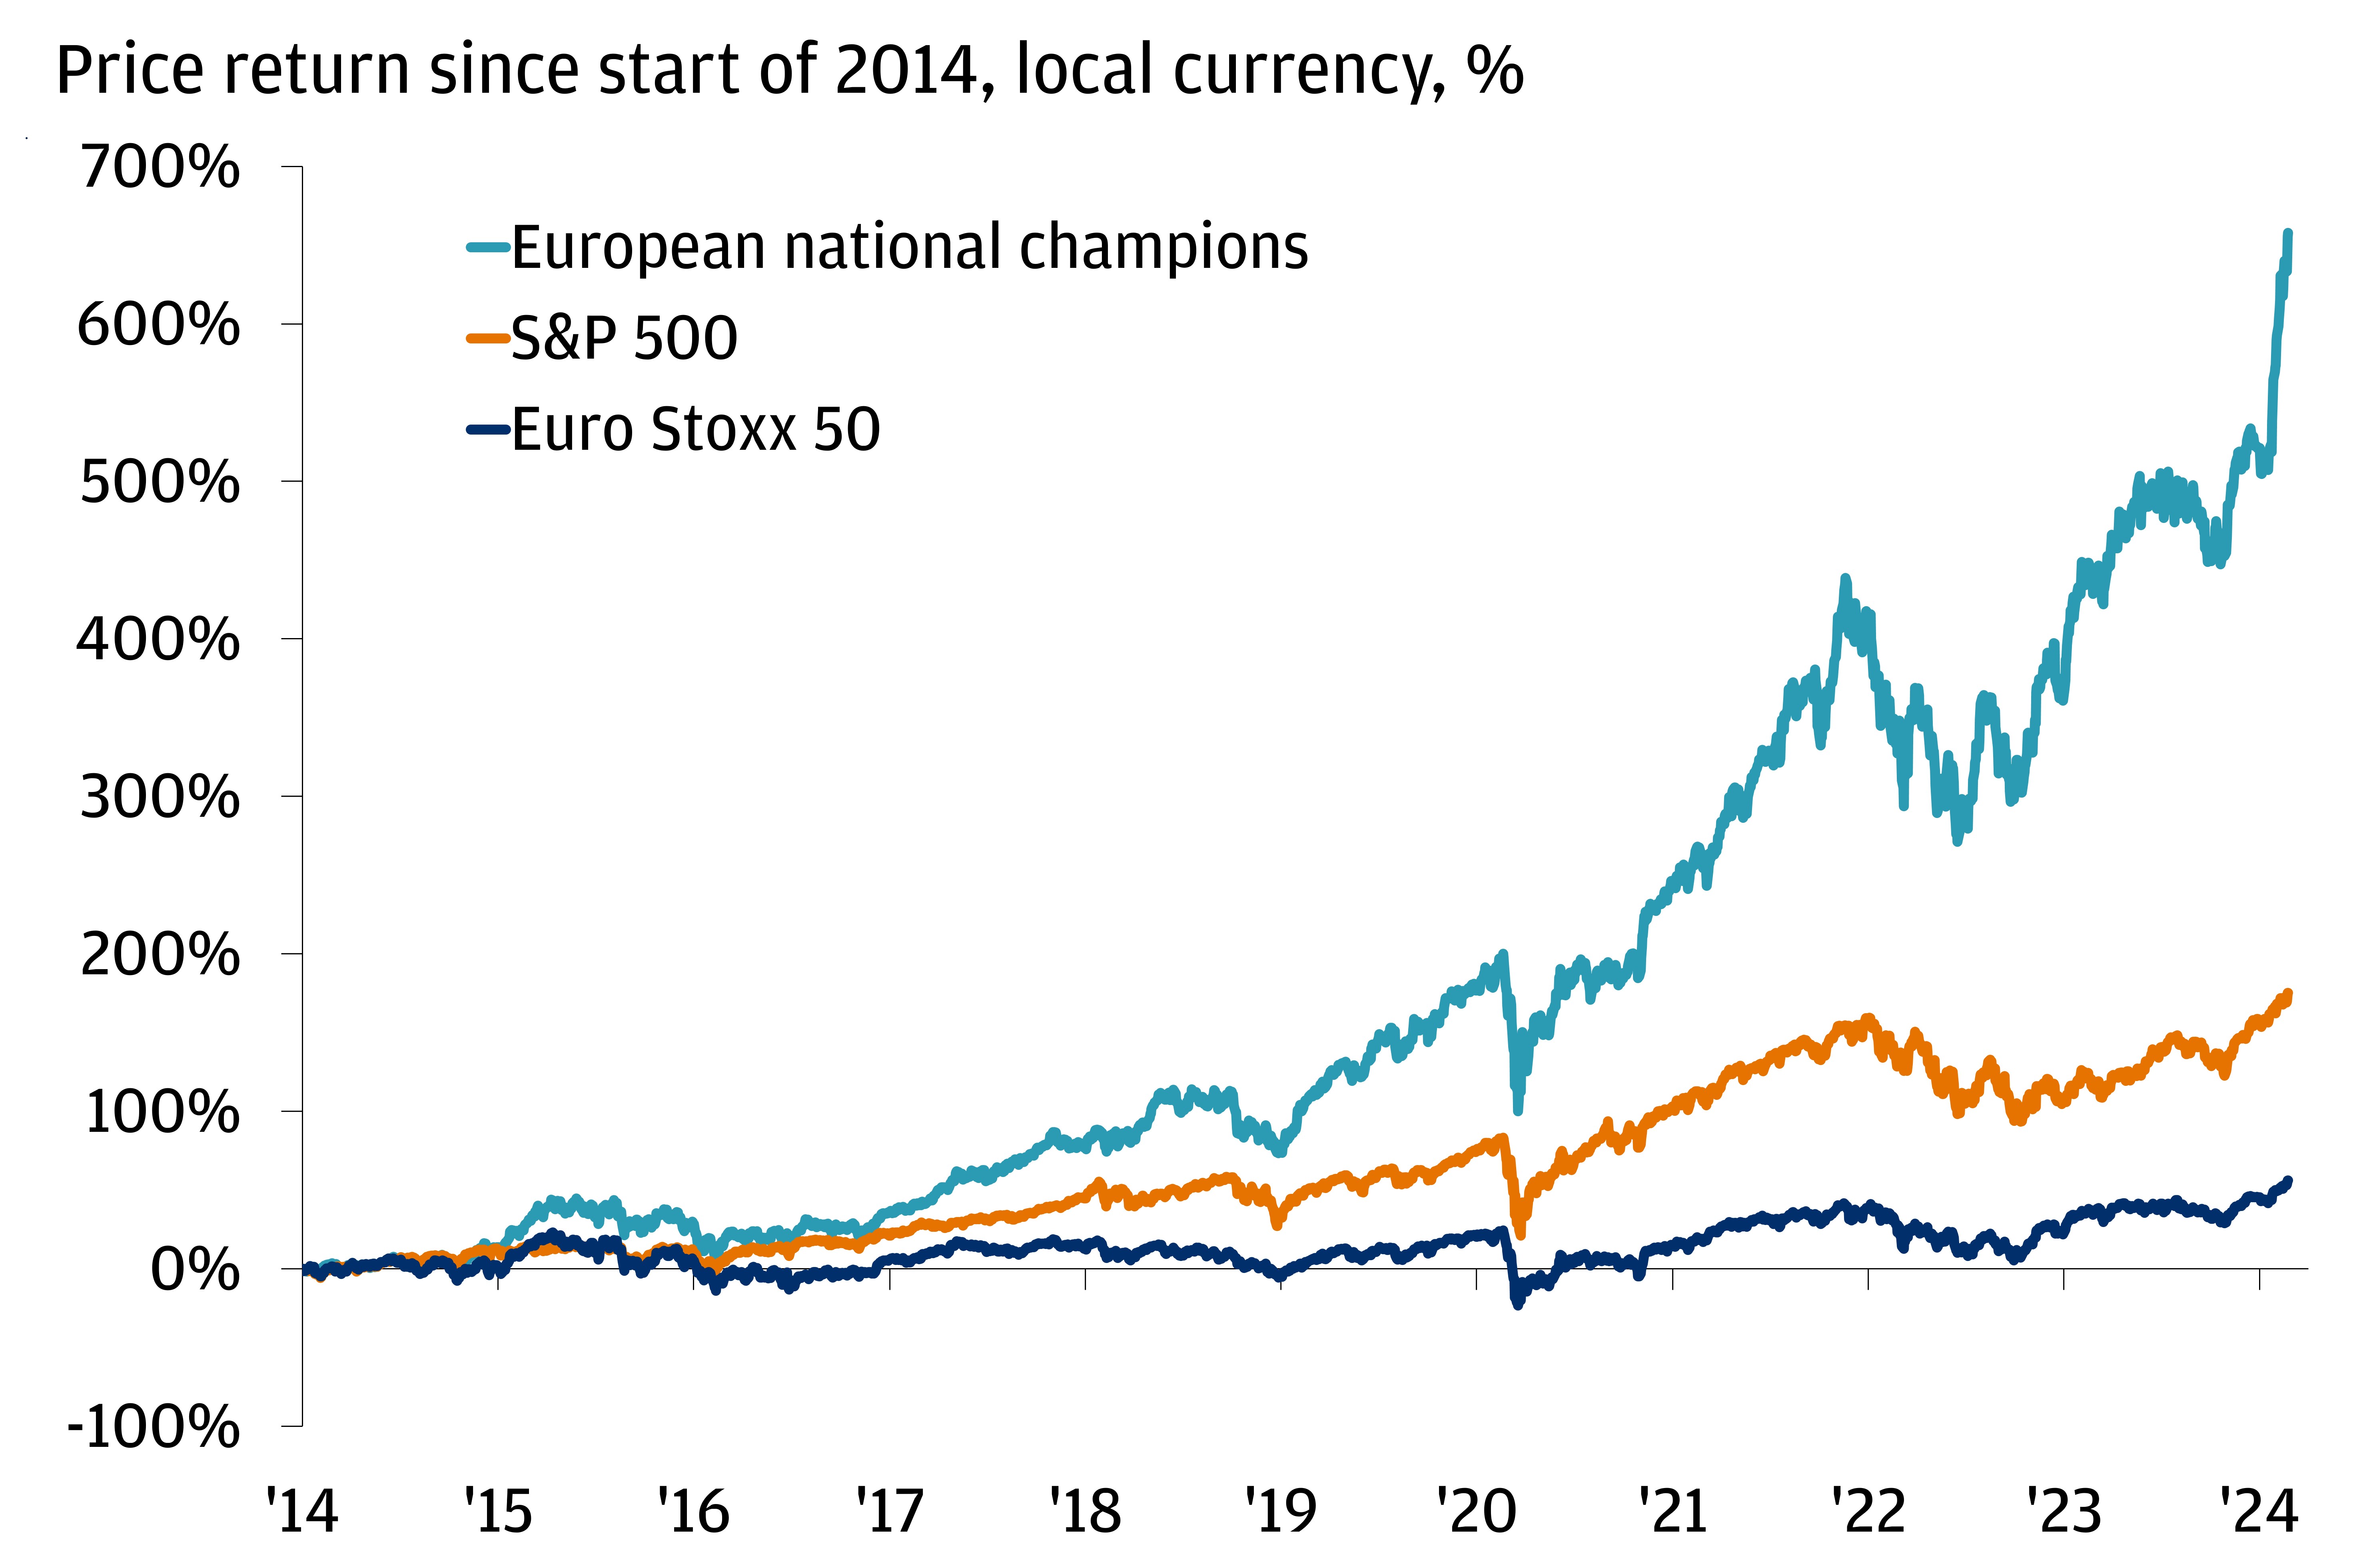 This chart shows the price returns since the start of 2014 for the S&P 500, Euro Stoxx 50 and European national champions, where the latter refers to an equally weighted basket of LVMH, Hermes, Safran, Schneider, ASML, Ferrari, Novo Nordisk.